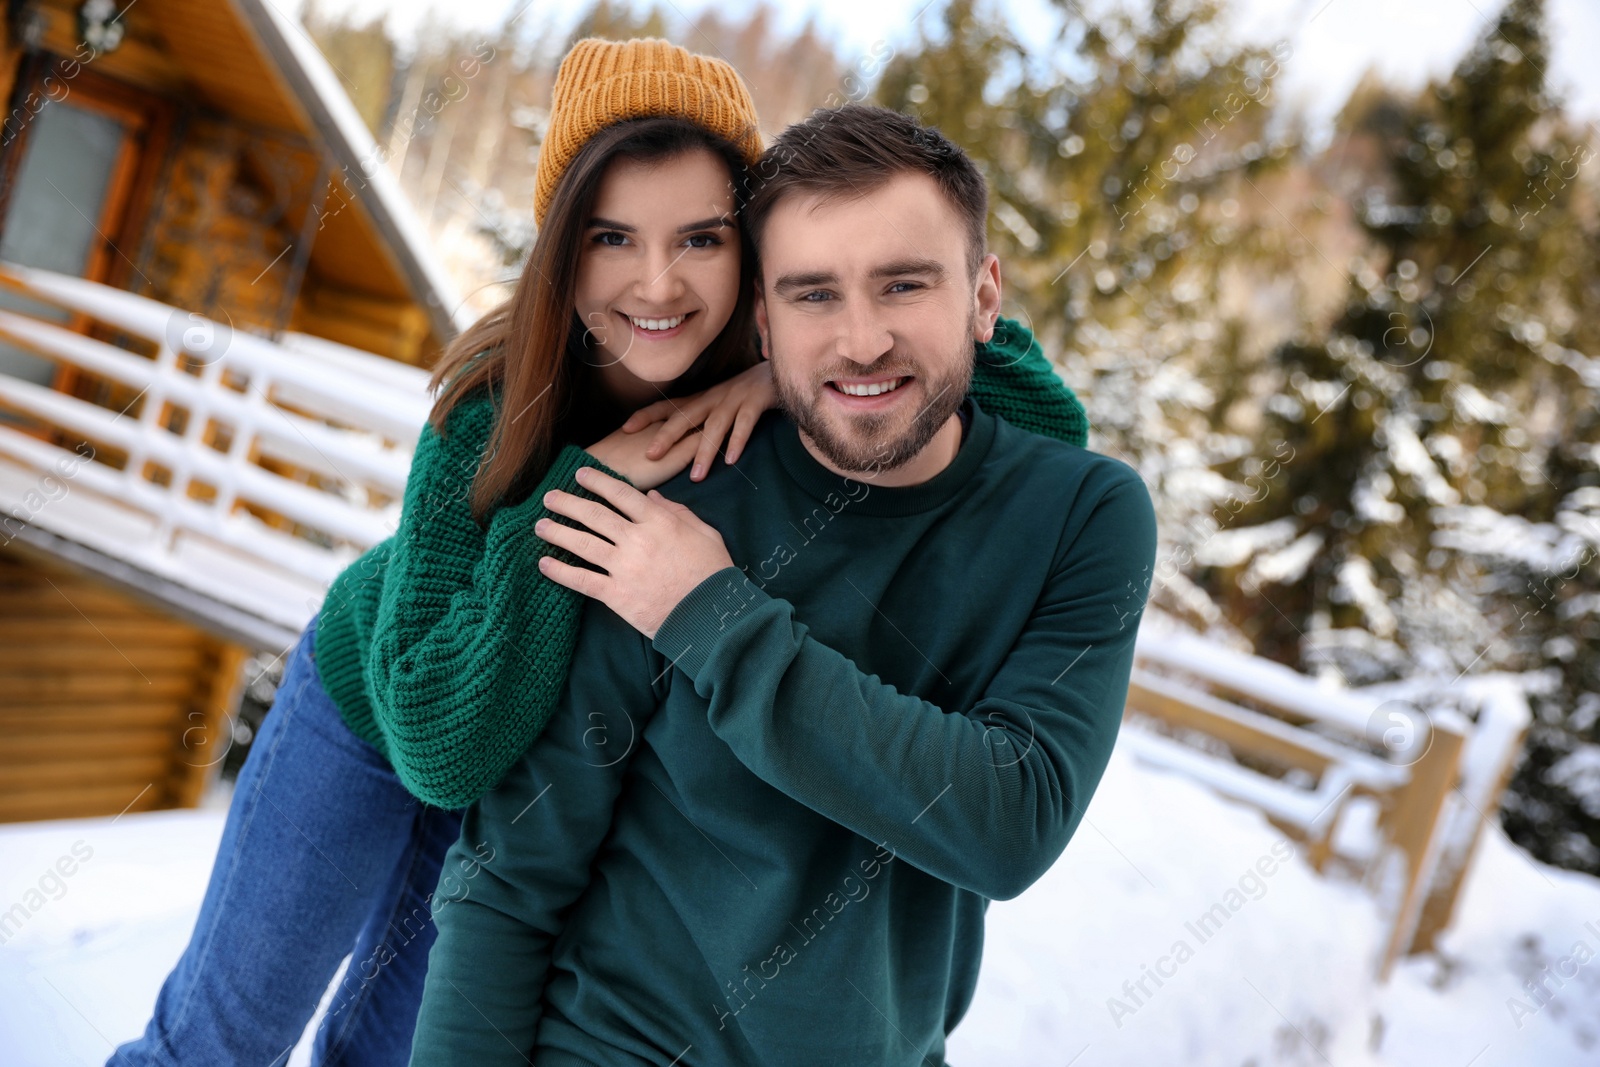 Photo of Lovely couple spending time together on snowy day. Winter vacation